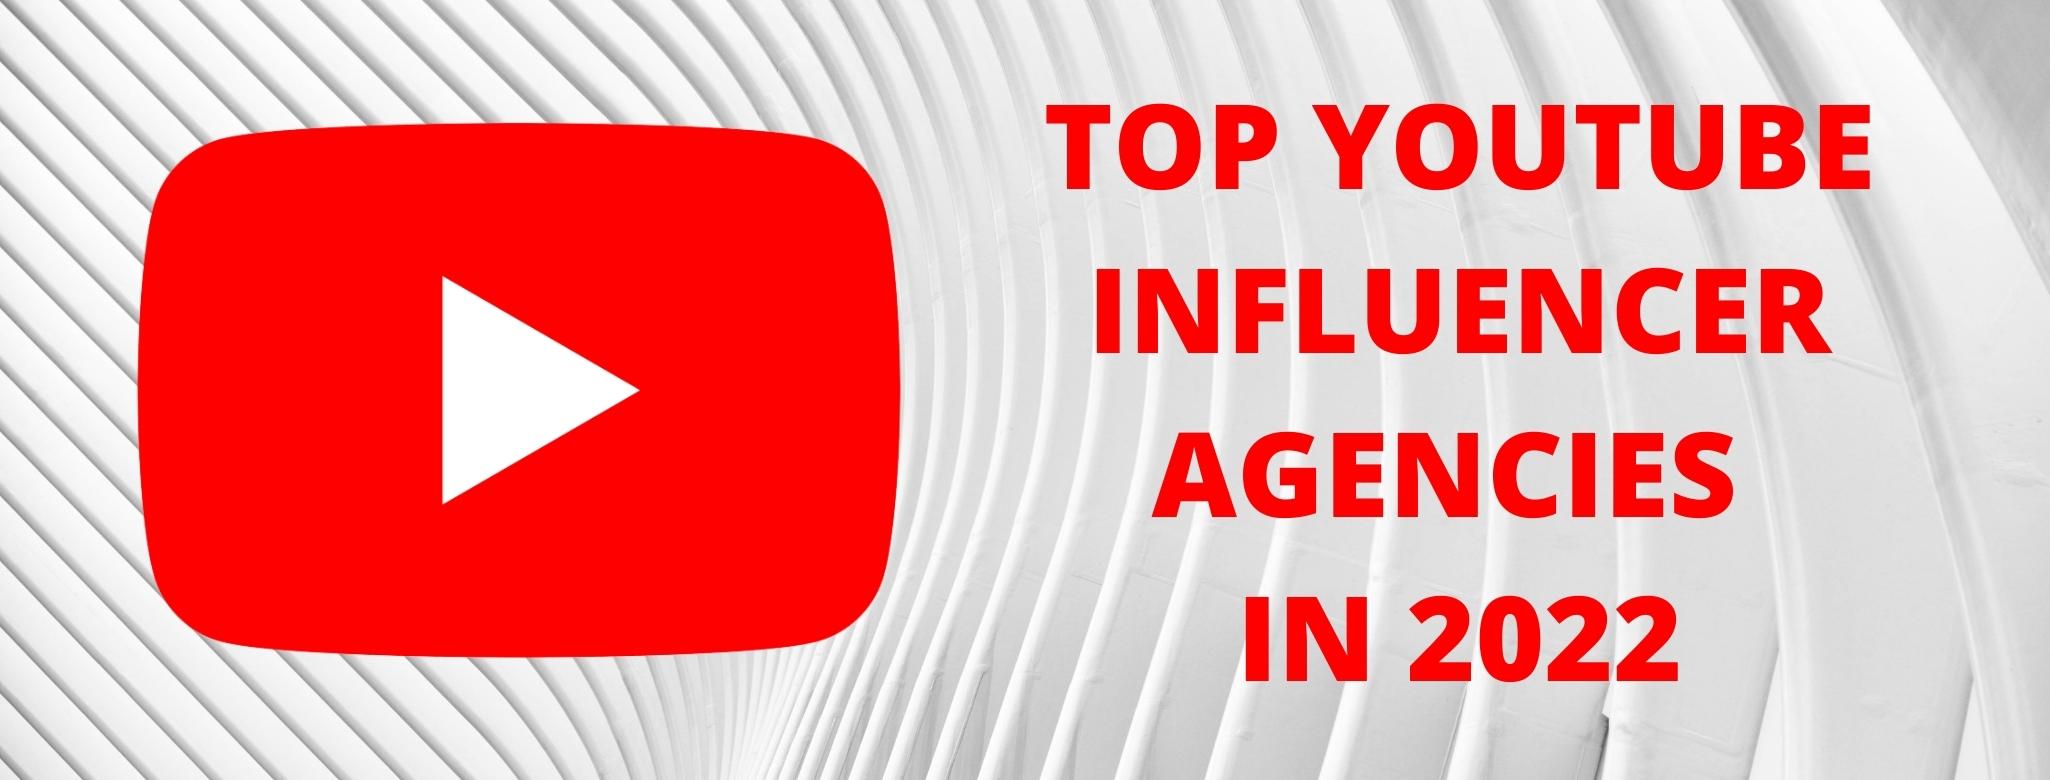 YouTube influencer agencies